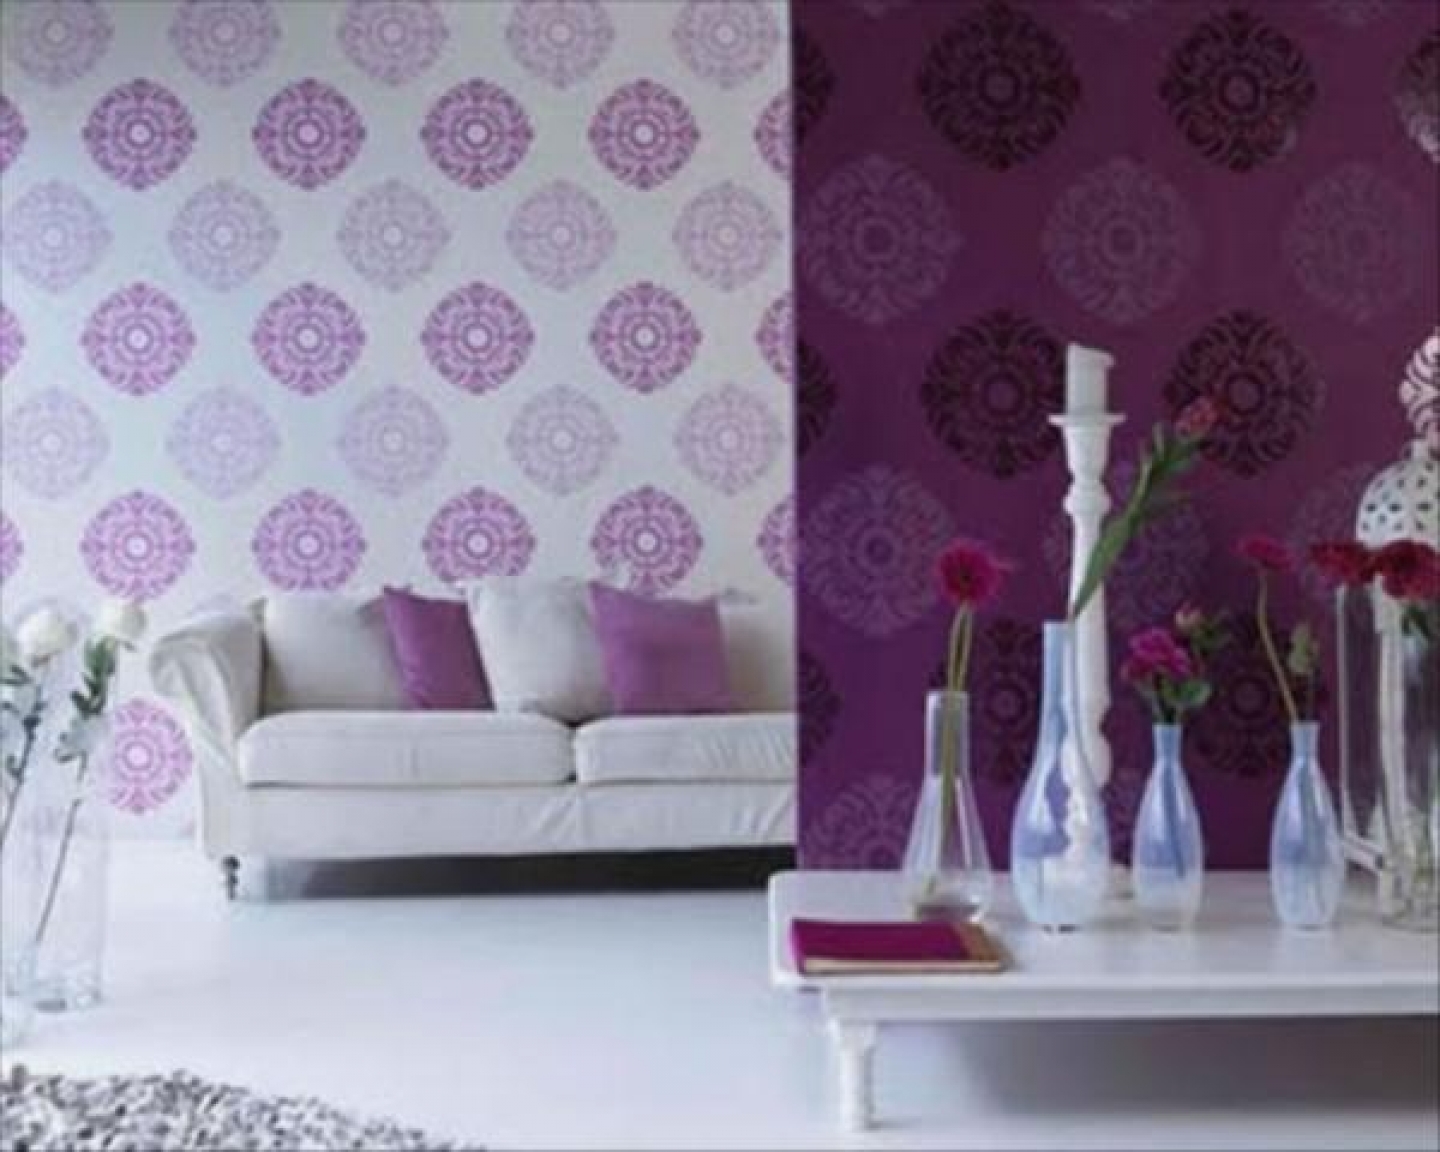 Tags Decor Decorating Ideas Floral Wallpaper Houses